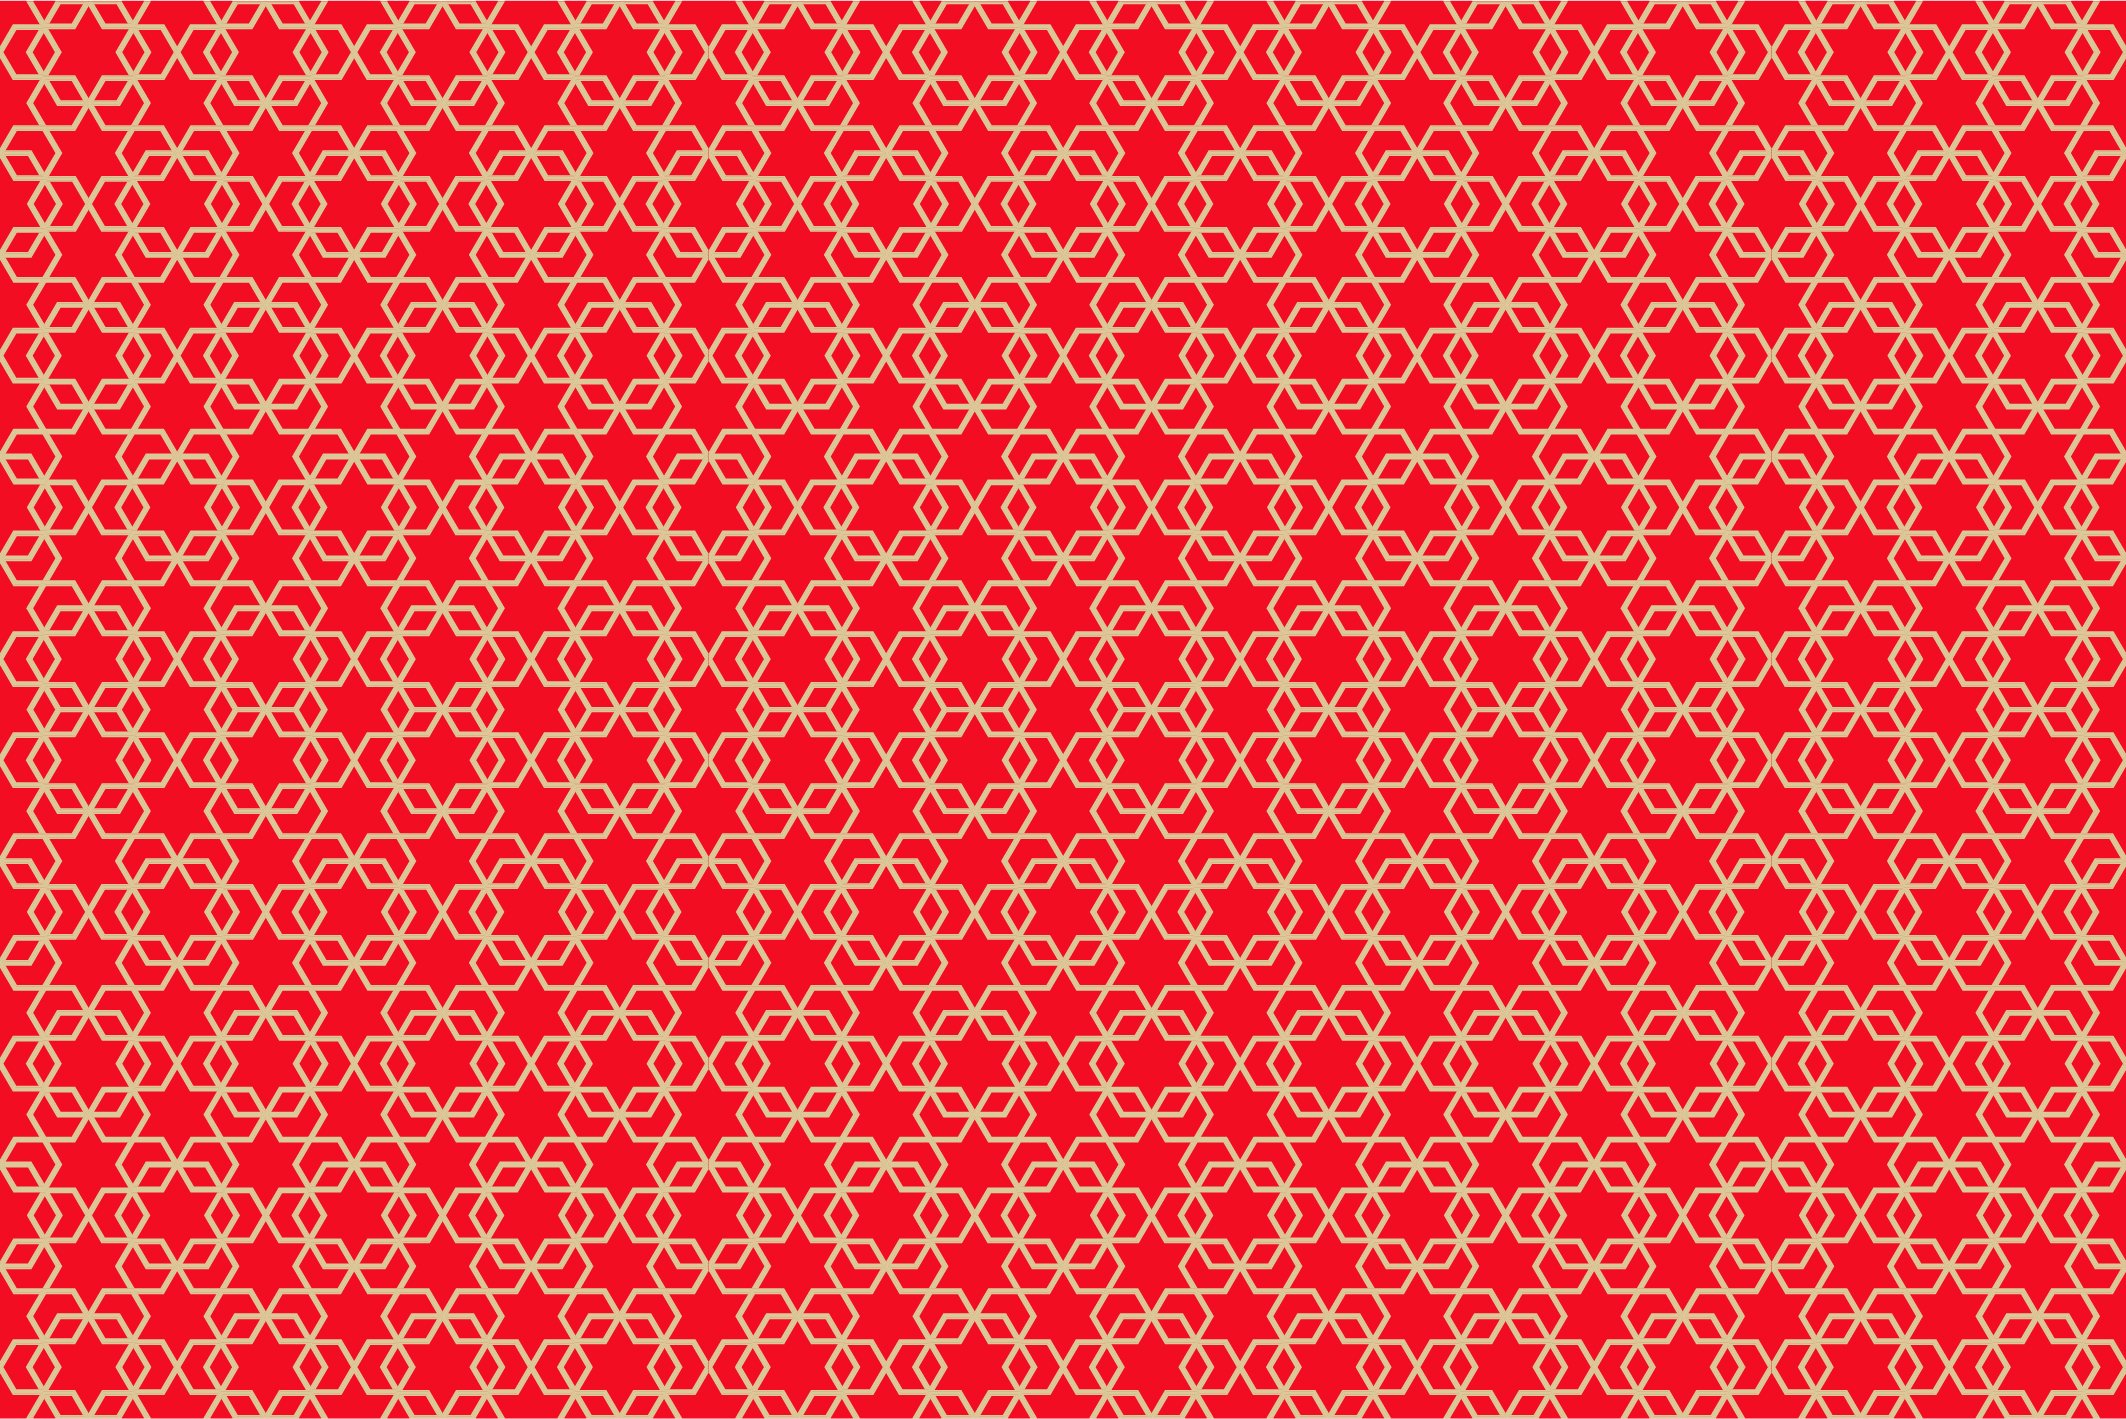 Small gold elements on a red background.